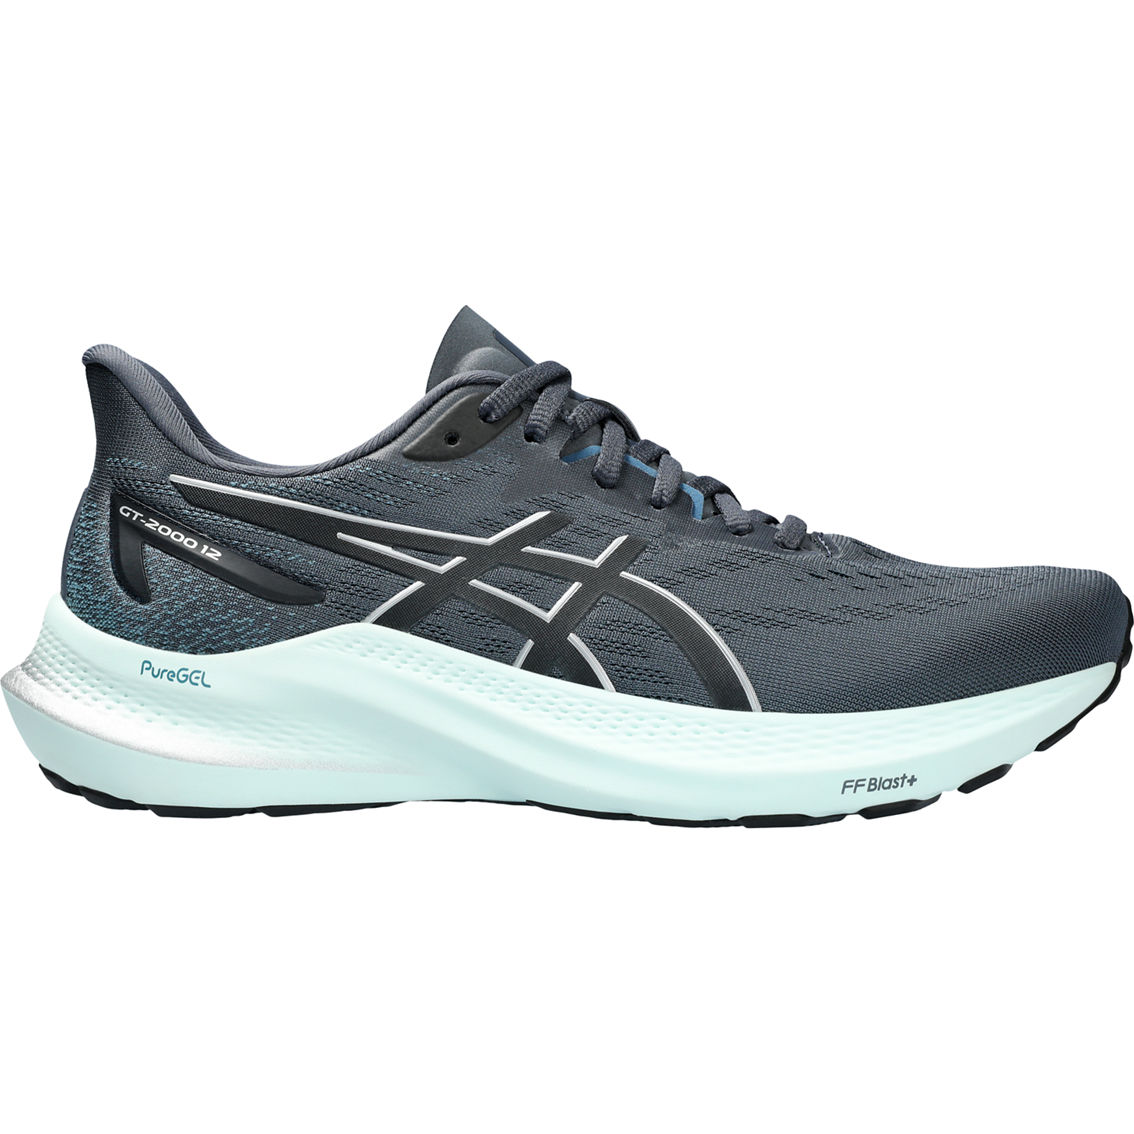 ASICS Women's GT 2000 12 Running Shoes - Image 4 of 7